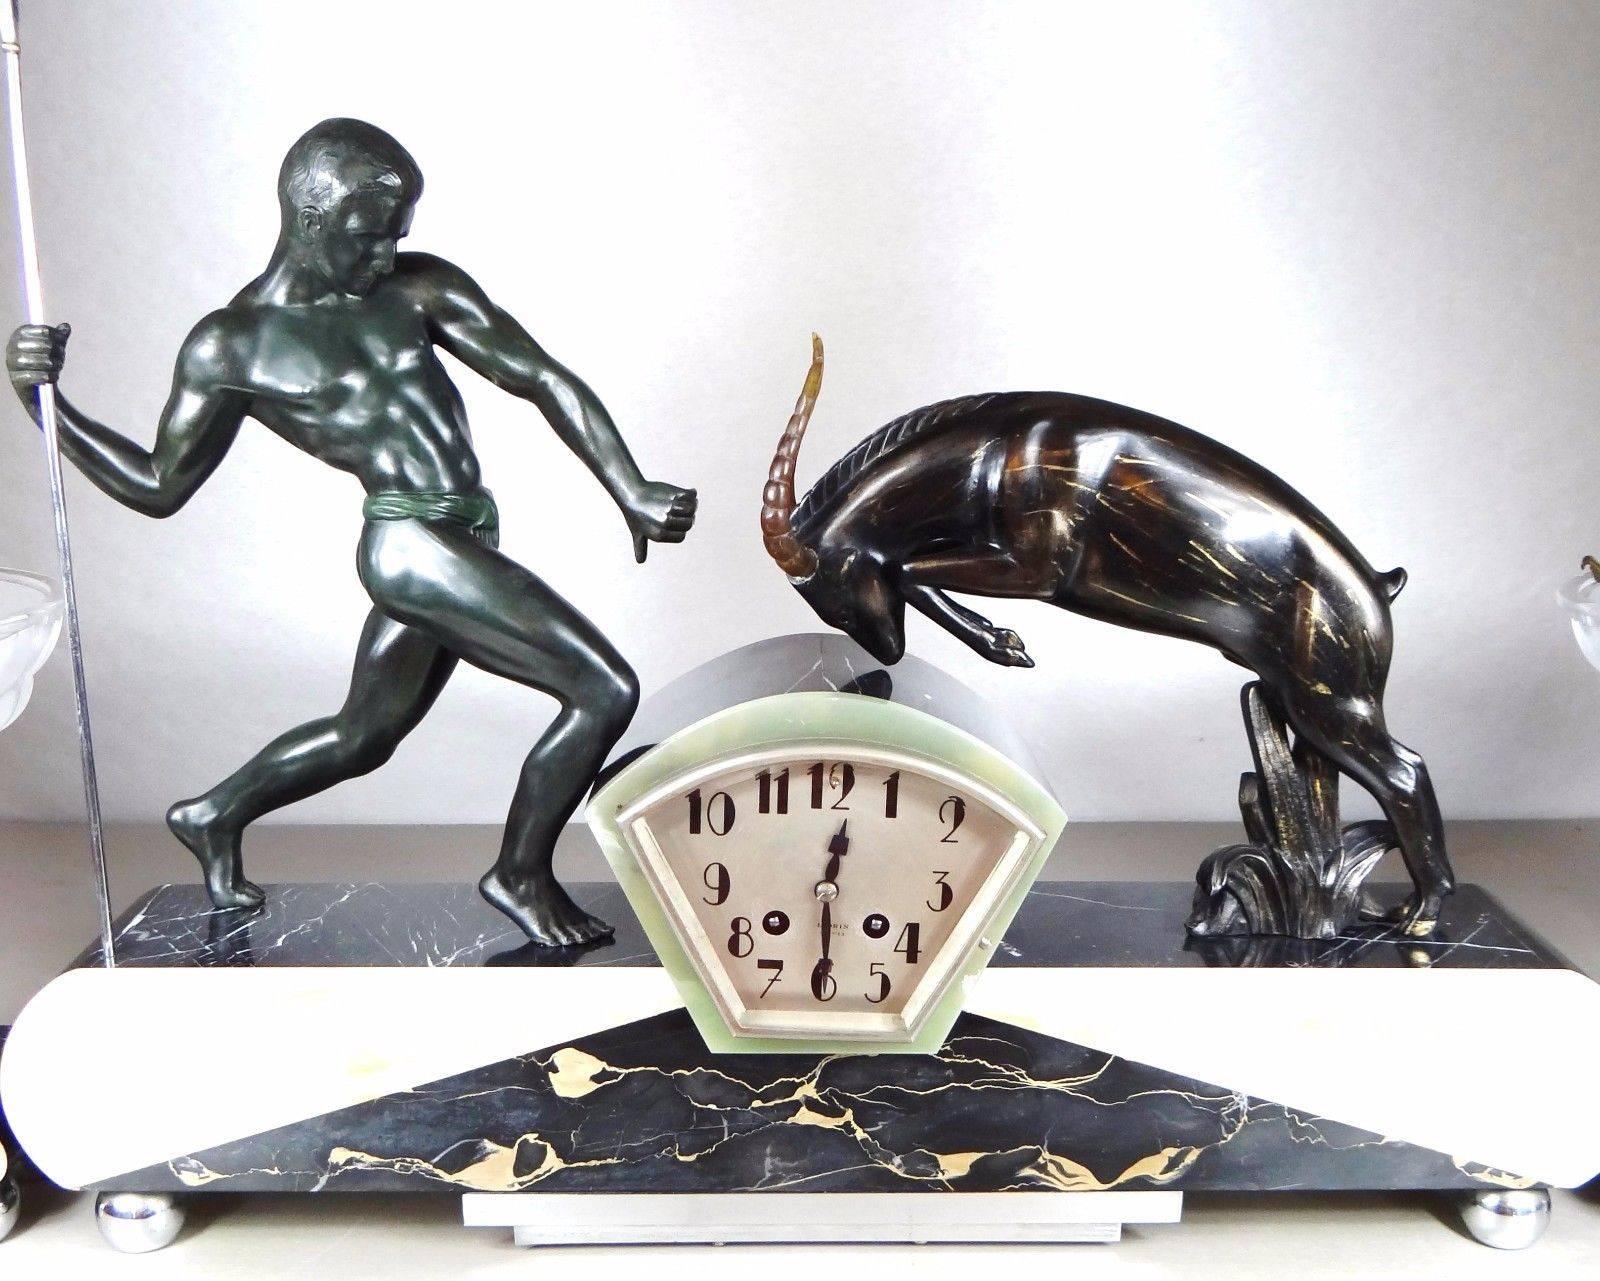 A rare Art Deco three-piece clock set, circa 1920, in working order, Signed Riolo by Salvator Riolo who was a member of the Salon Artists France and was awarded medals in 1930 Dimensions 64cm long, 12cm deep and 50cm high. The vases are 20cm long,